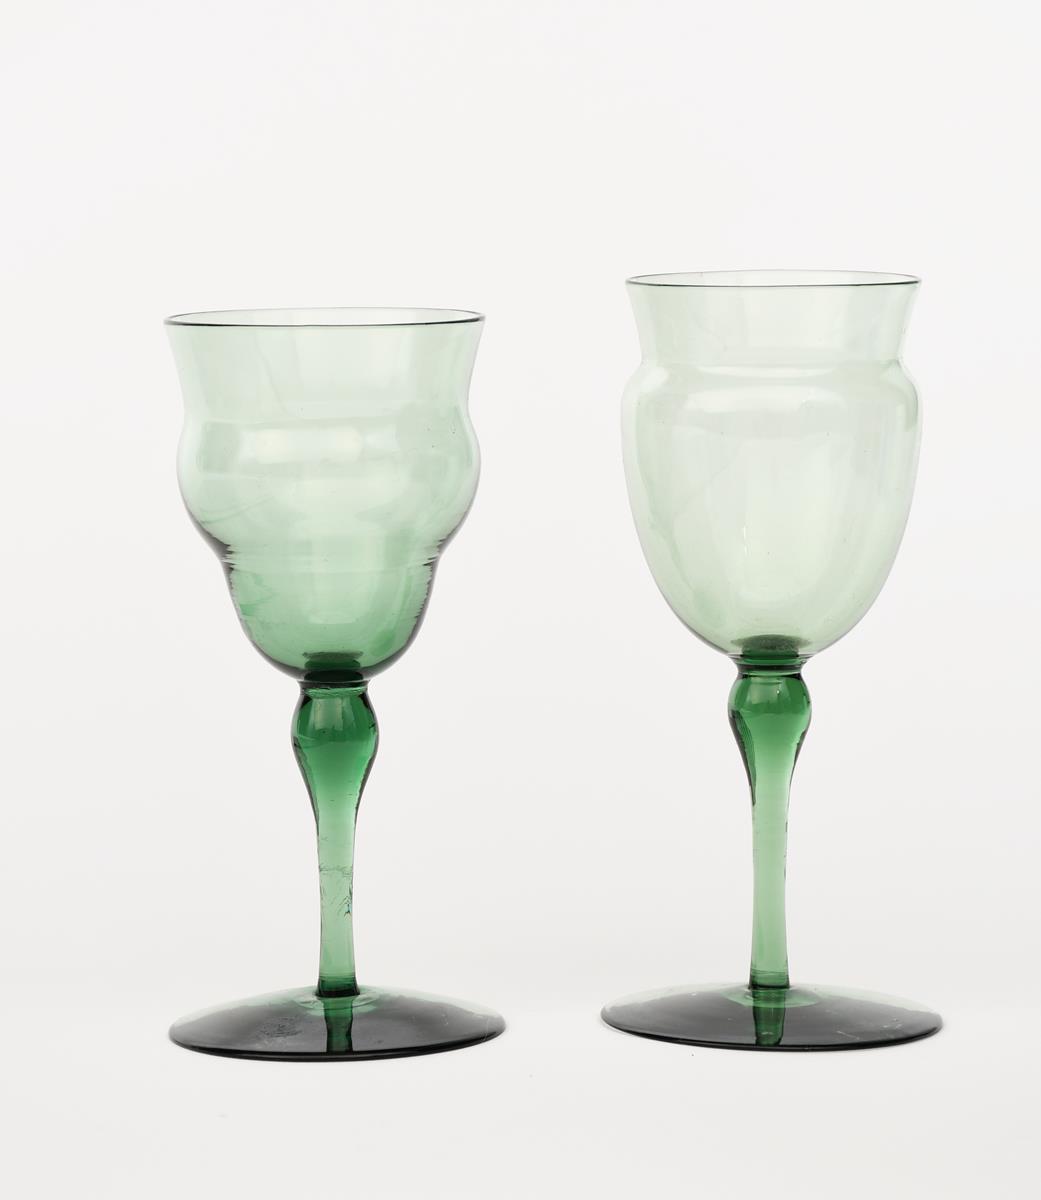 Two James Powell & Sons Whitefriars emerald green wine glasses designed by T G Jackson, each with